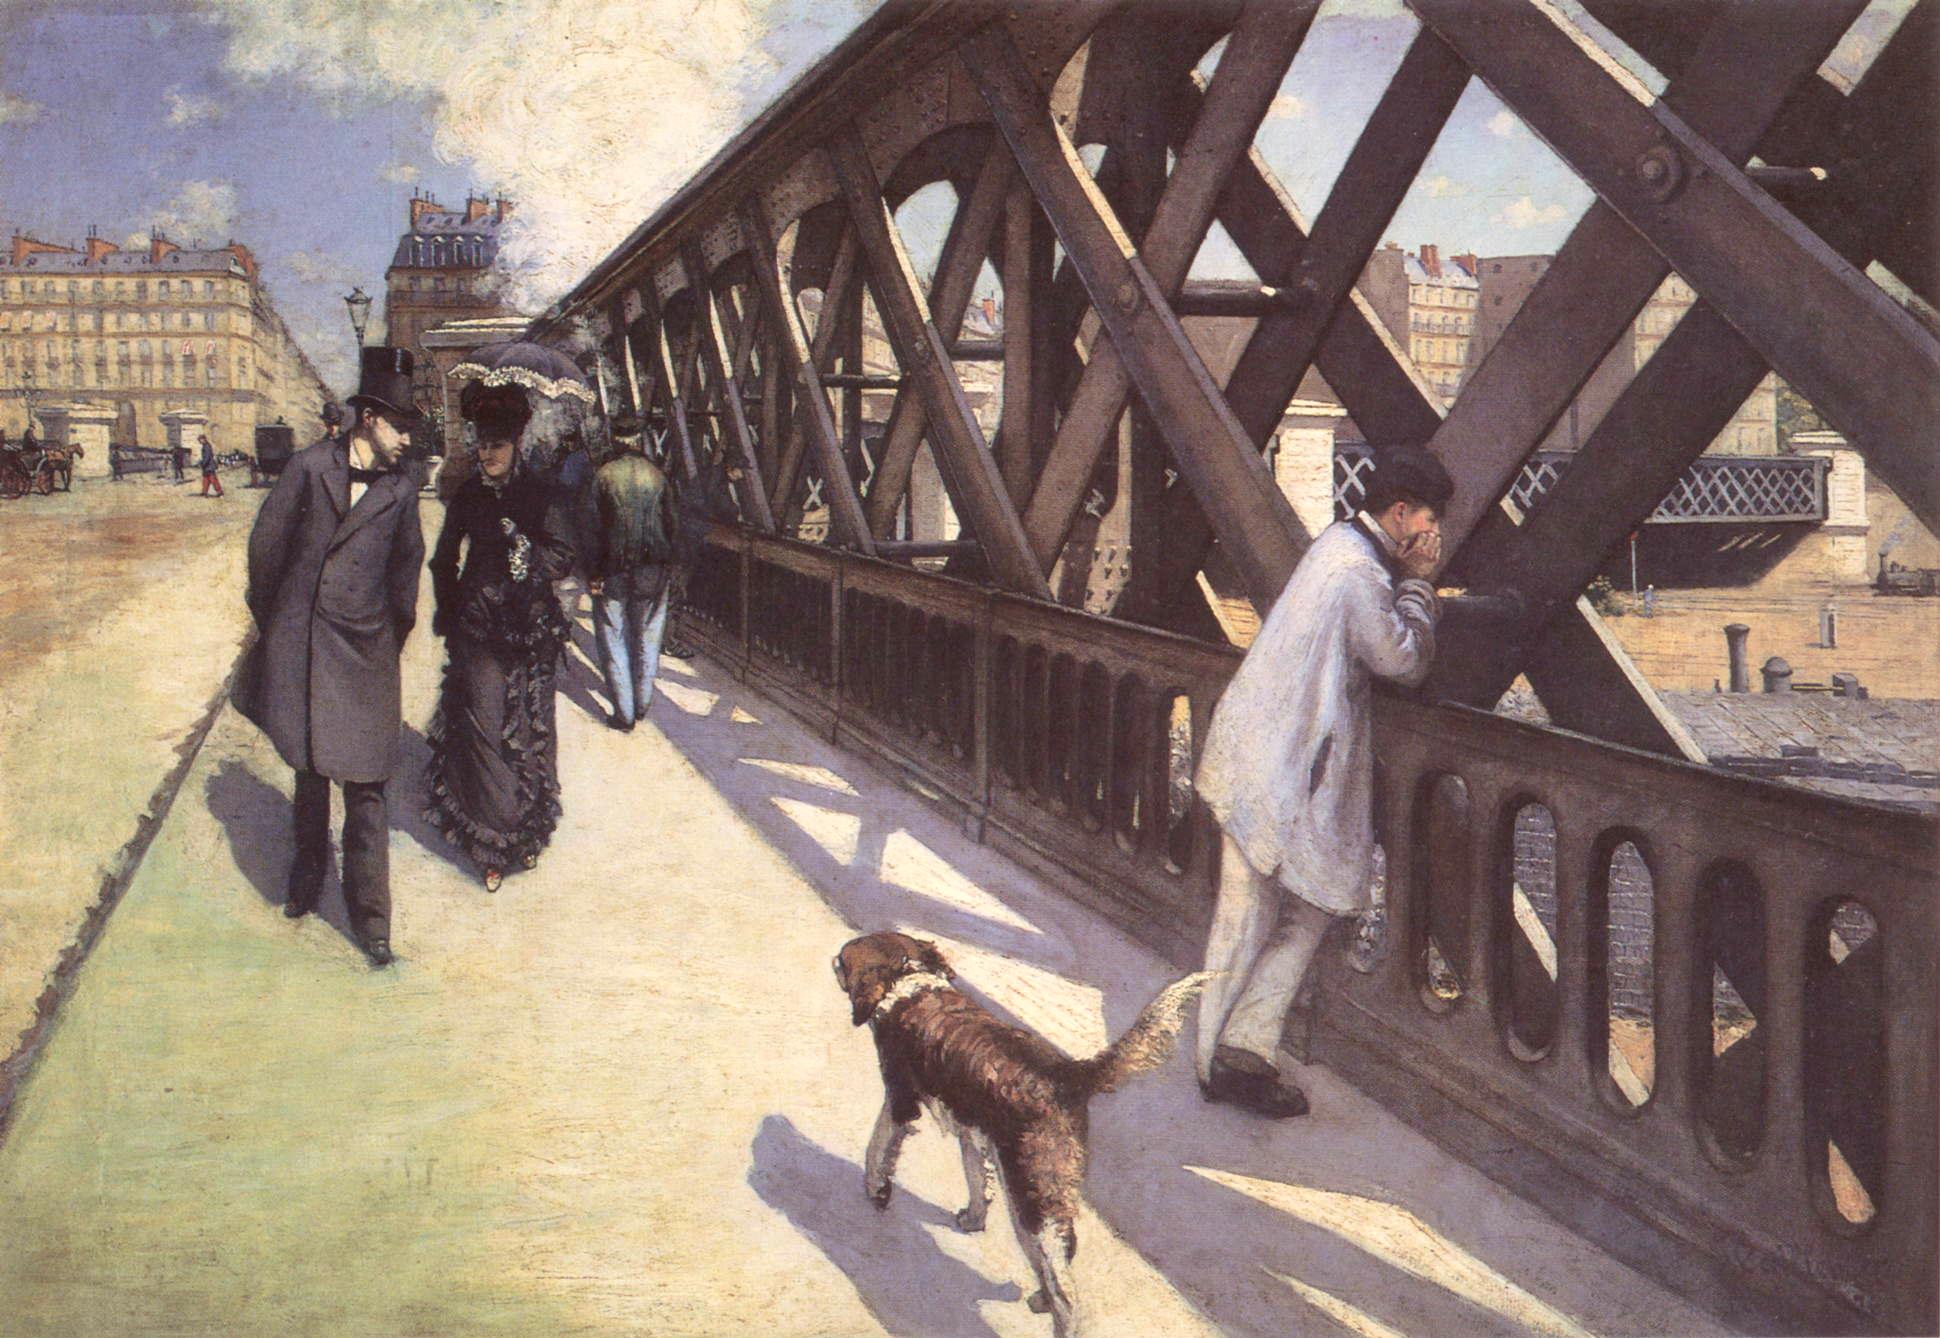 Most Evropa by Gustave Caillebotte - 1876 - 125 cm x 181 cm 